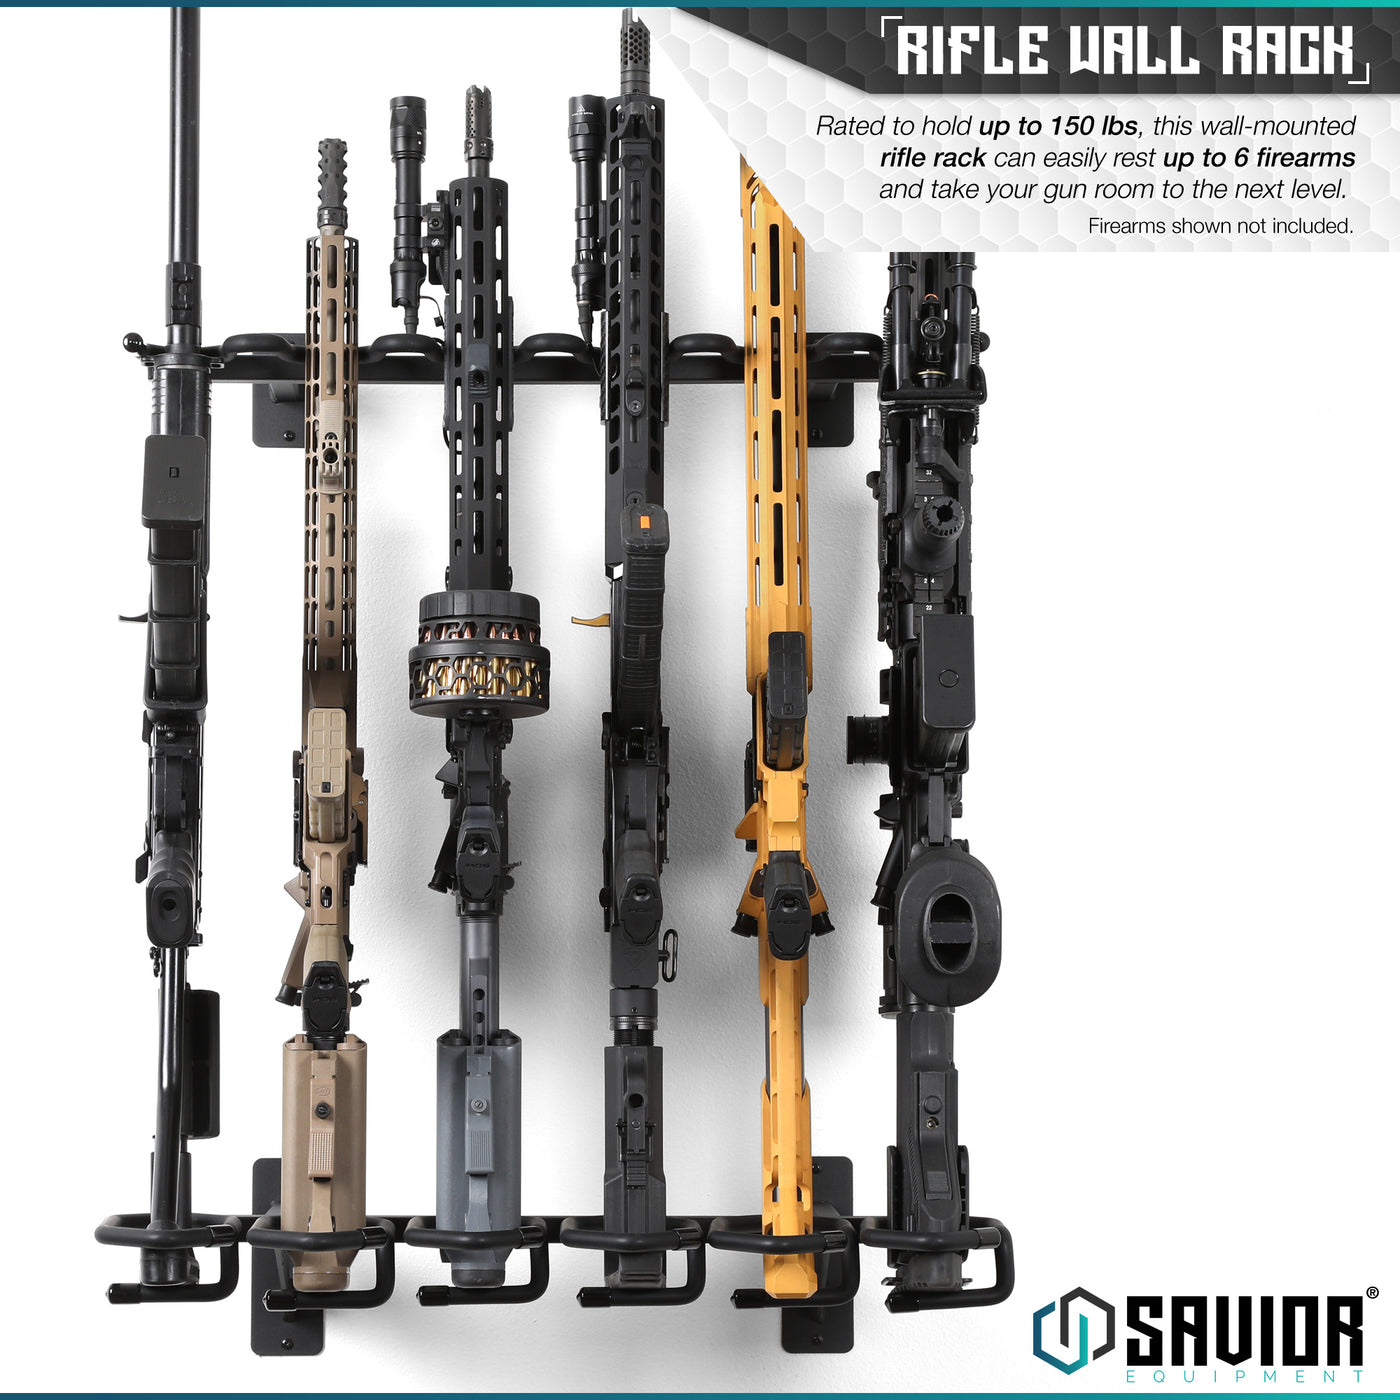 Rifle Wall Rack - Rated to hold up to 150 lbs, this wall-mounted rifle rack can easily rest up to 6 firearms and take your gun room to the next level. Firearms shown not included.